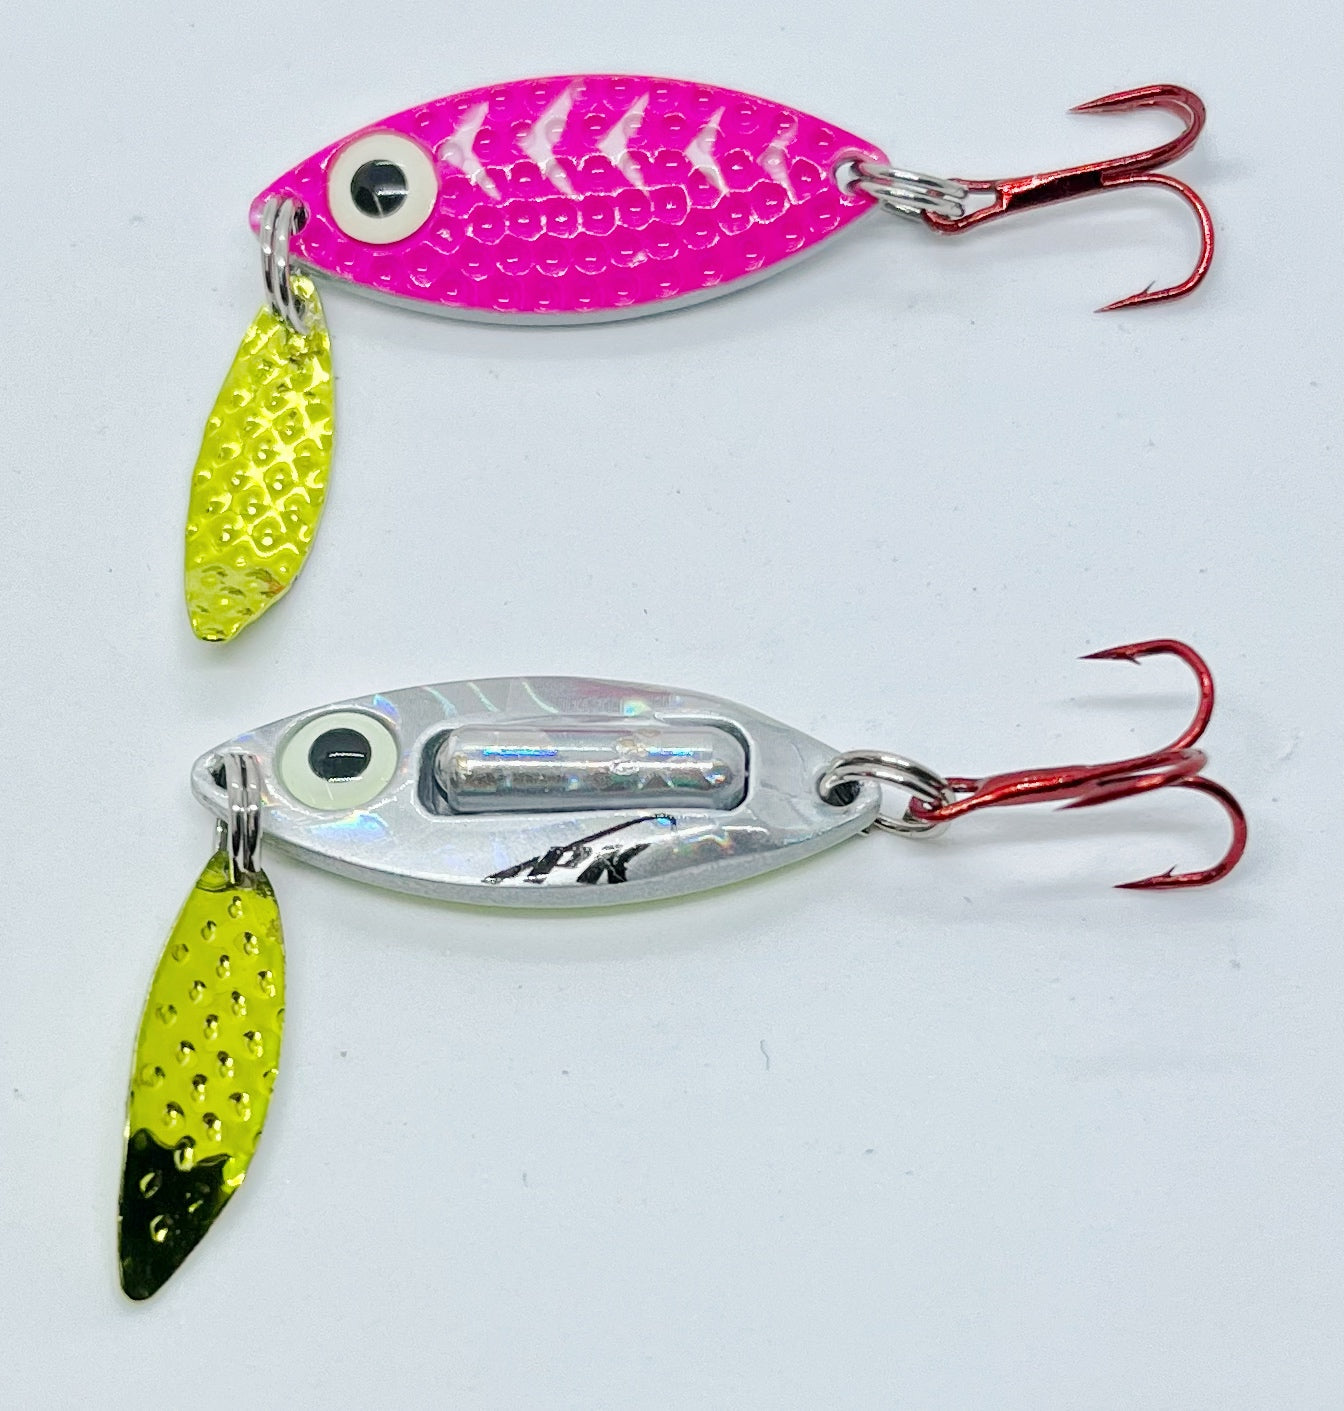 New Ice Fishing Rattle Jigging Spoons - PK Lures